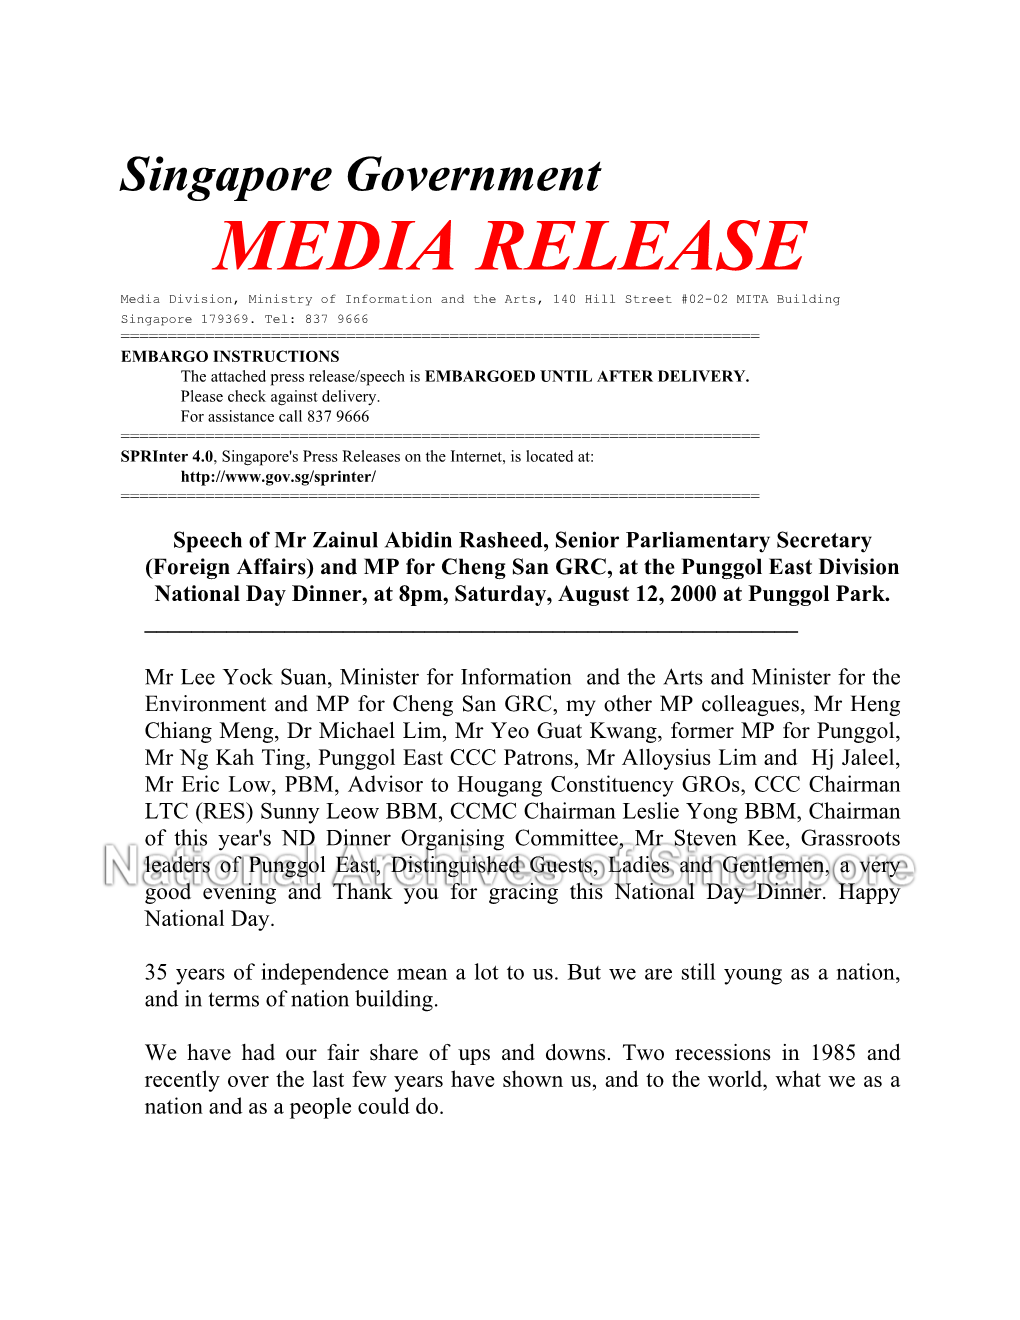 Singapore Government MEDIA RELEASE Media Division, Ministry of Information and the Arts, 140 Hill Street #02-02 MITA Building Singapore 179369